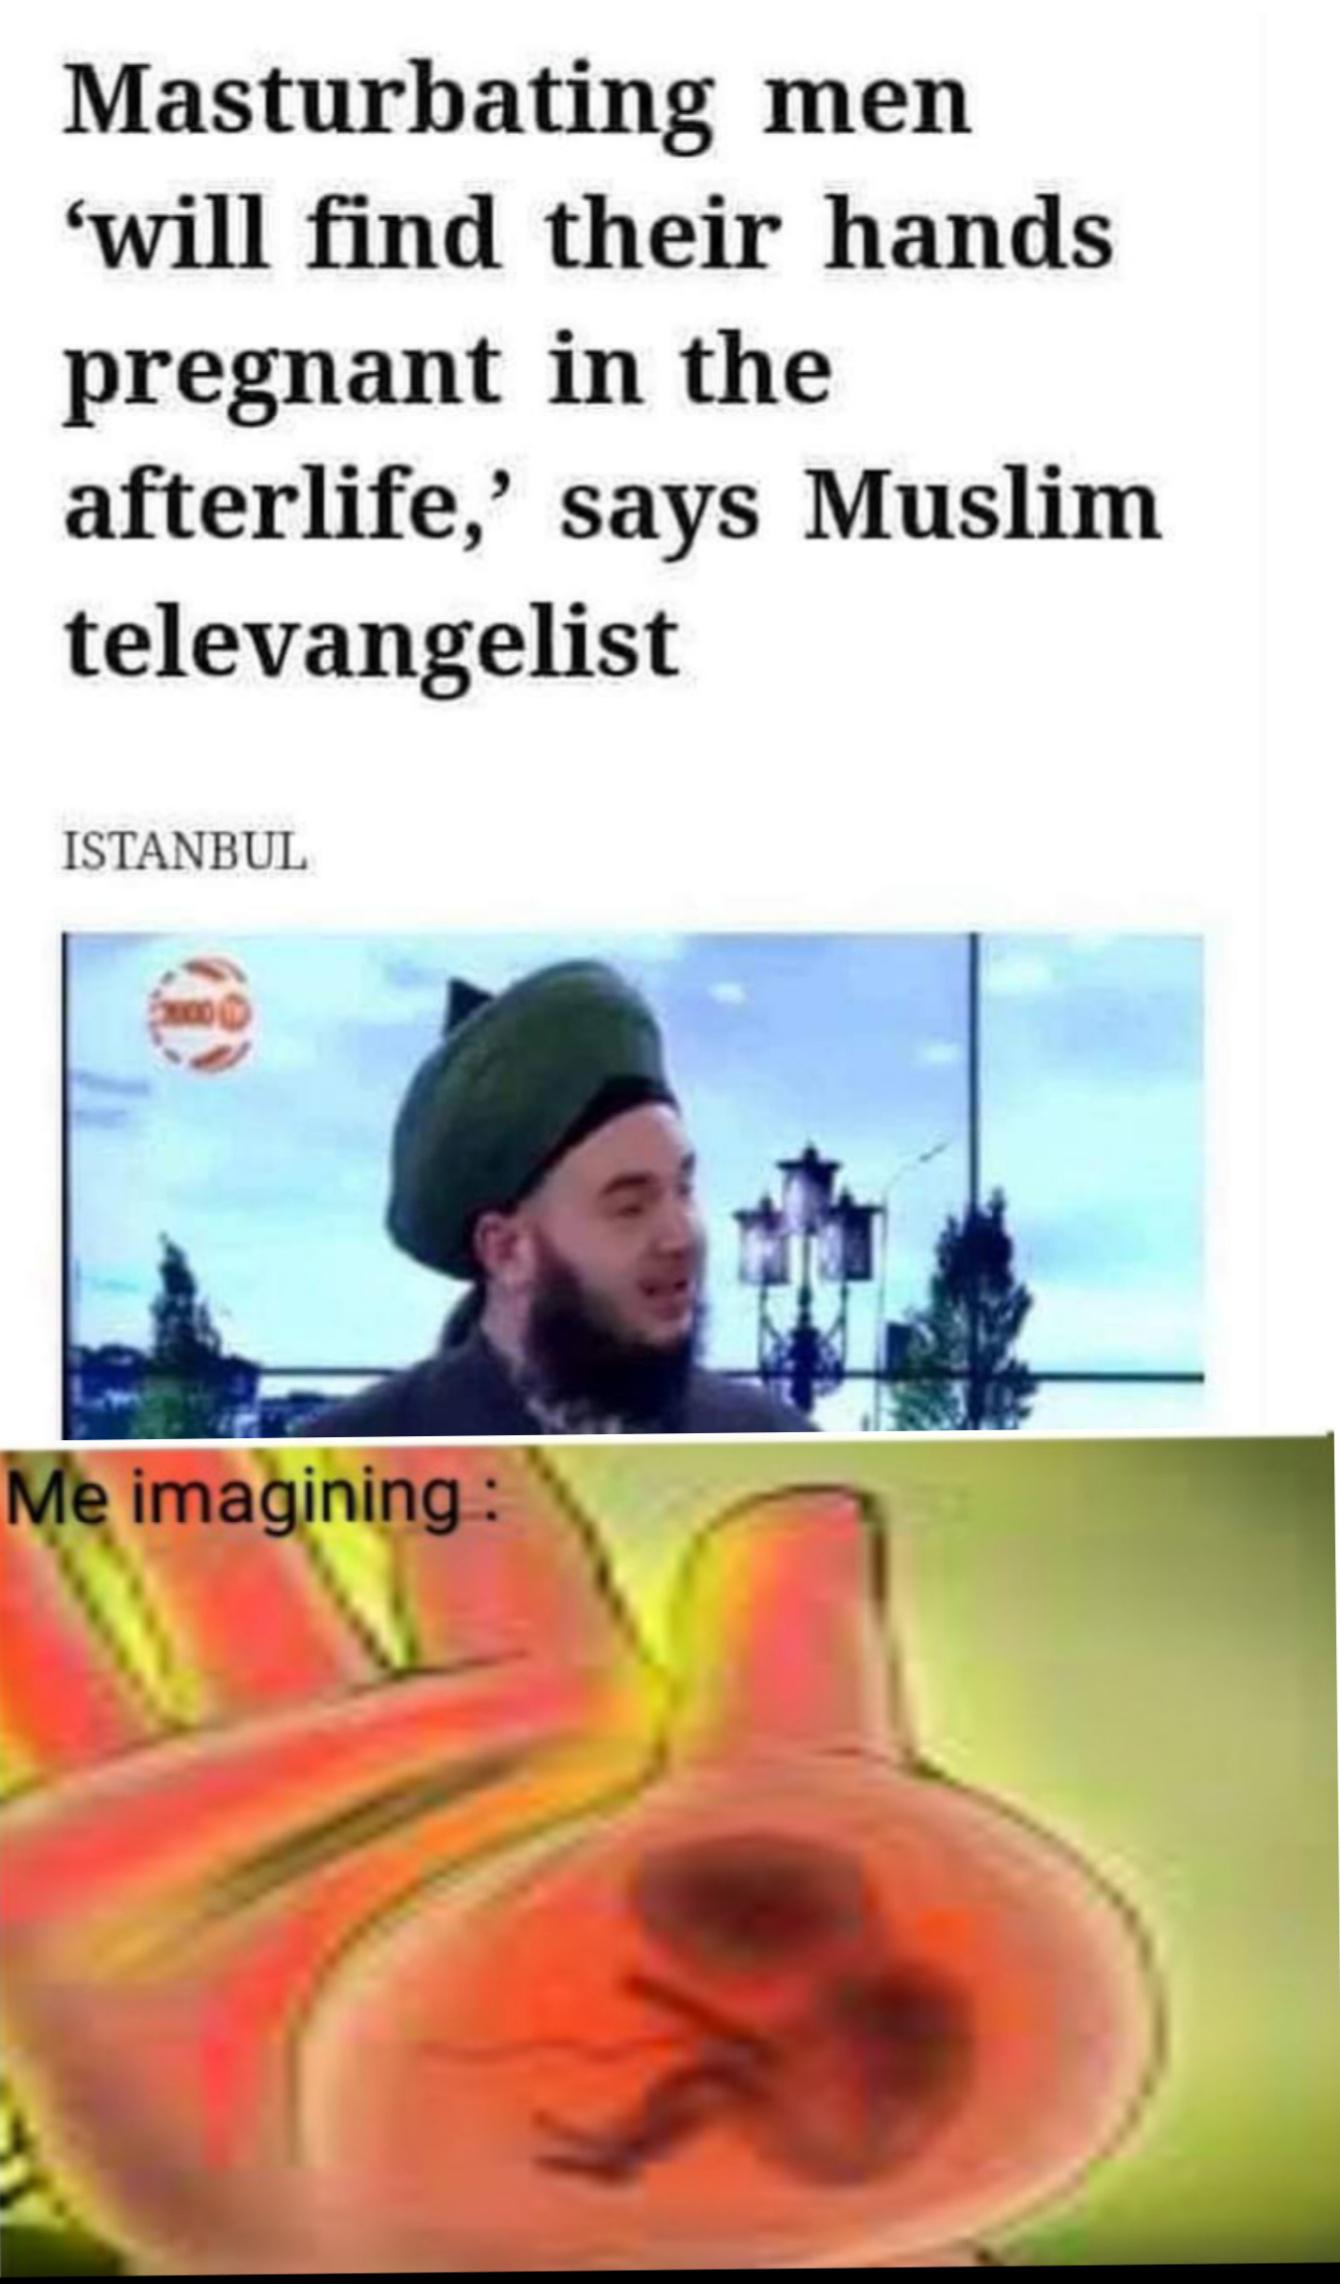 women in the afterlife men in the afterlife - Masturbating men 'will find their hands pregnant in the afterlife,' says Muslim televangelist Istanbul Me imagining